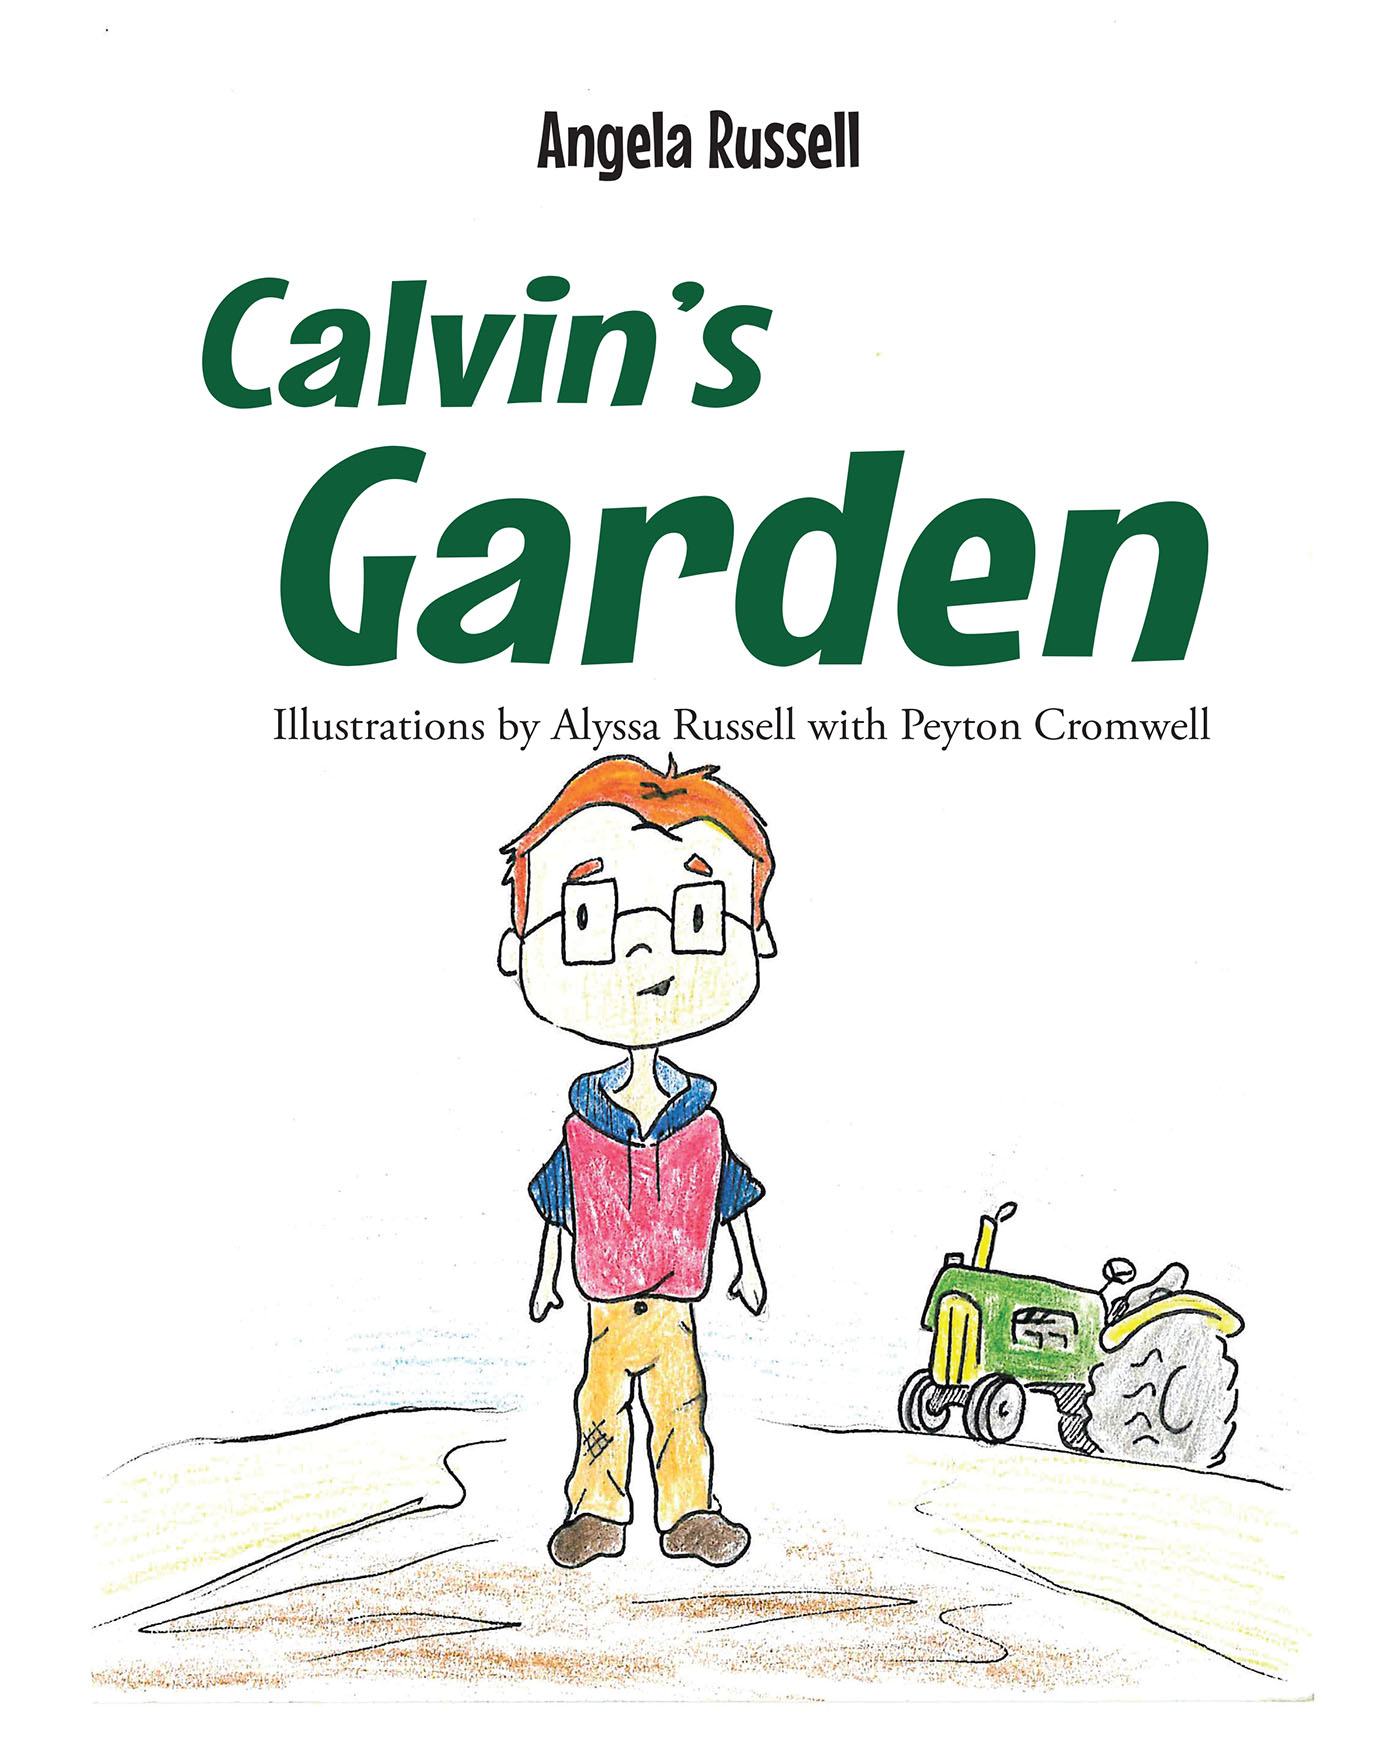 Angela Russell’s Newly Released "Calvin’s Garden" is a Whimsical Journey Into Friendship and Nature